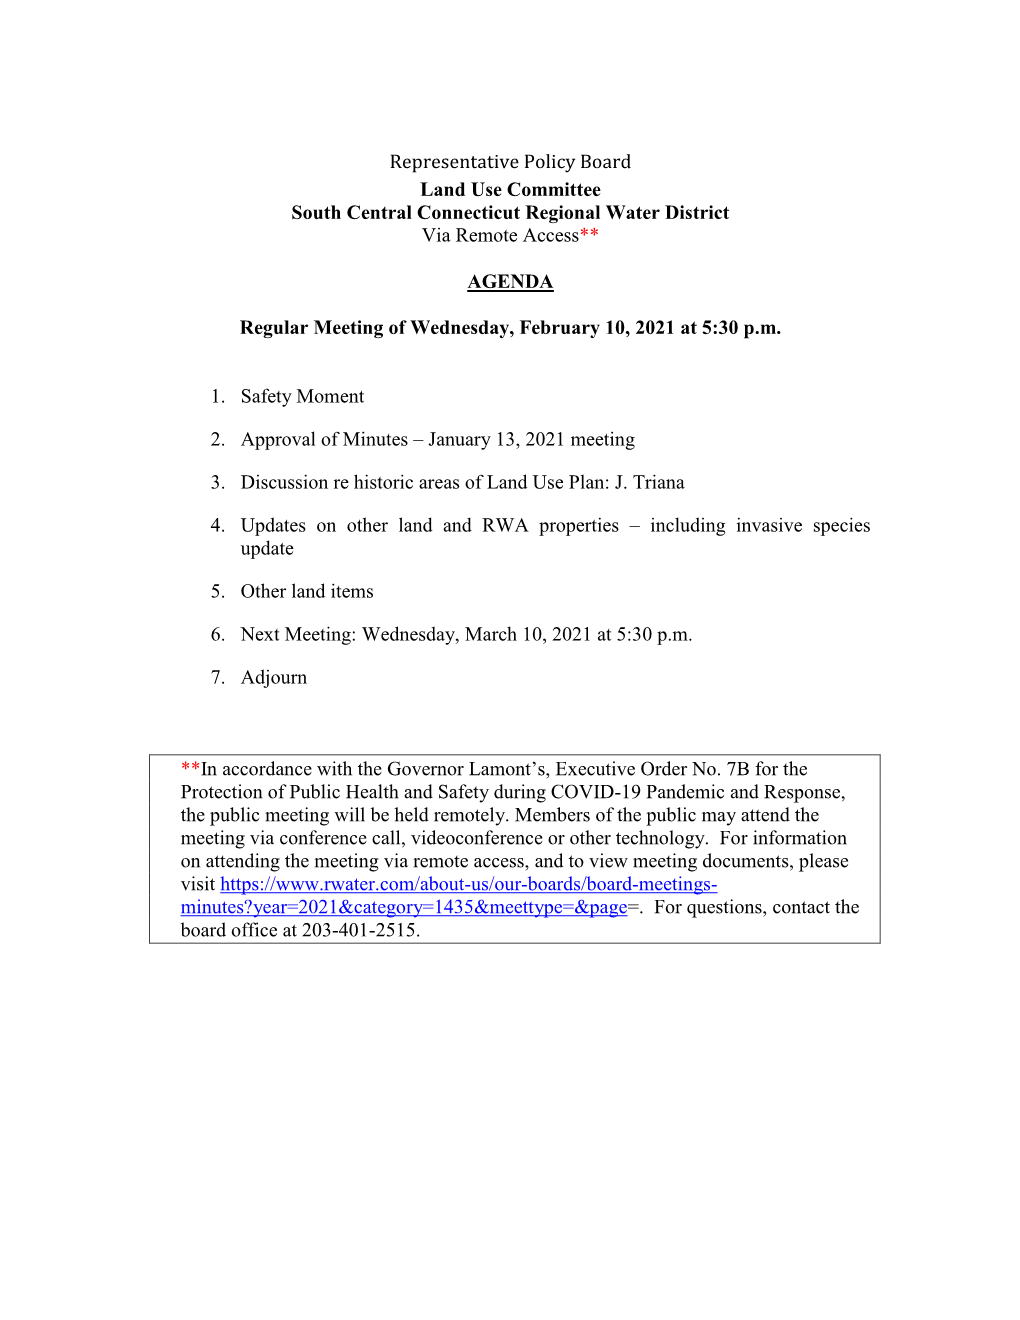 Representative Policy Board Land Use Committee South Central Connecticut Regional Water District Via Remote Access**